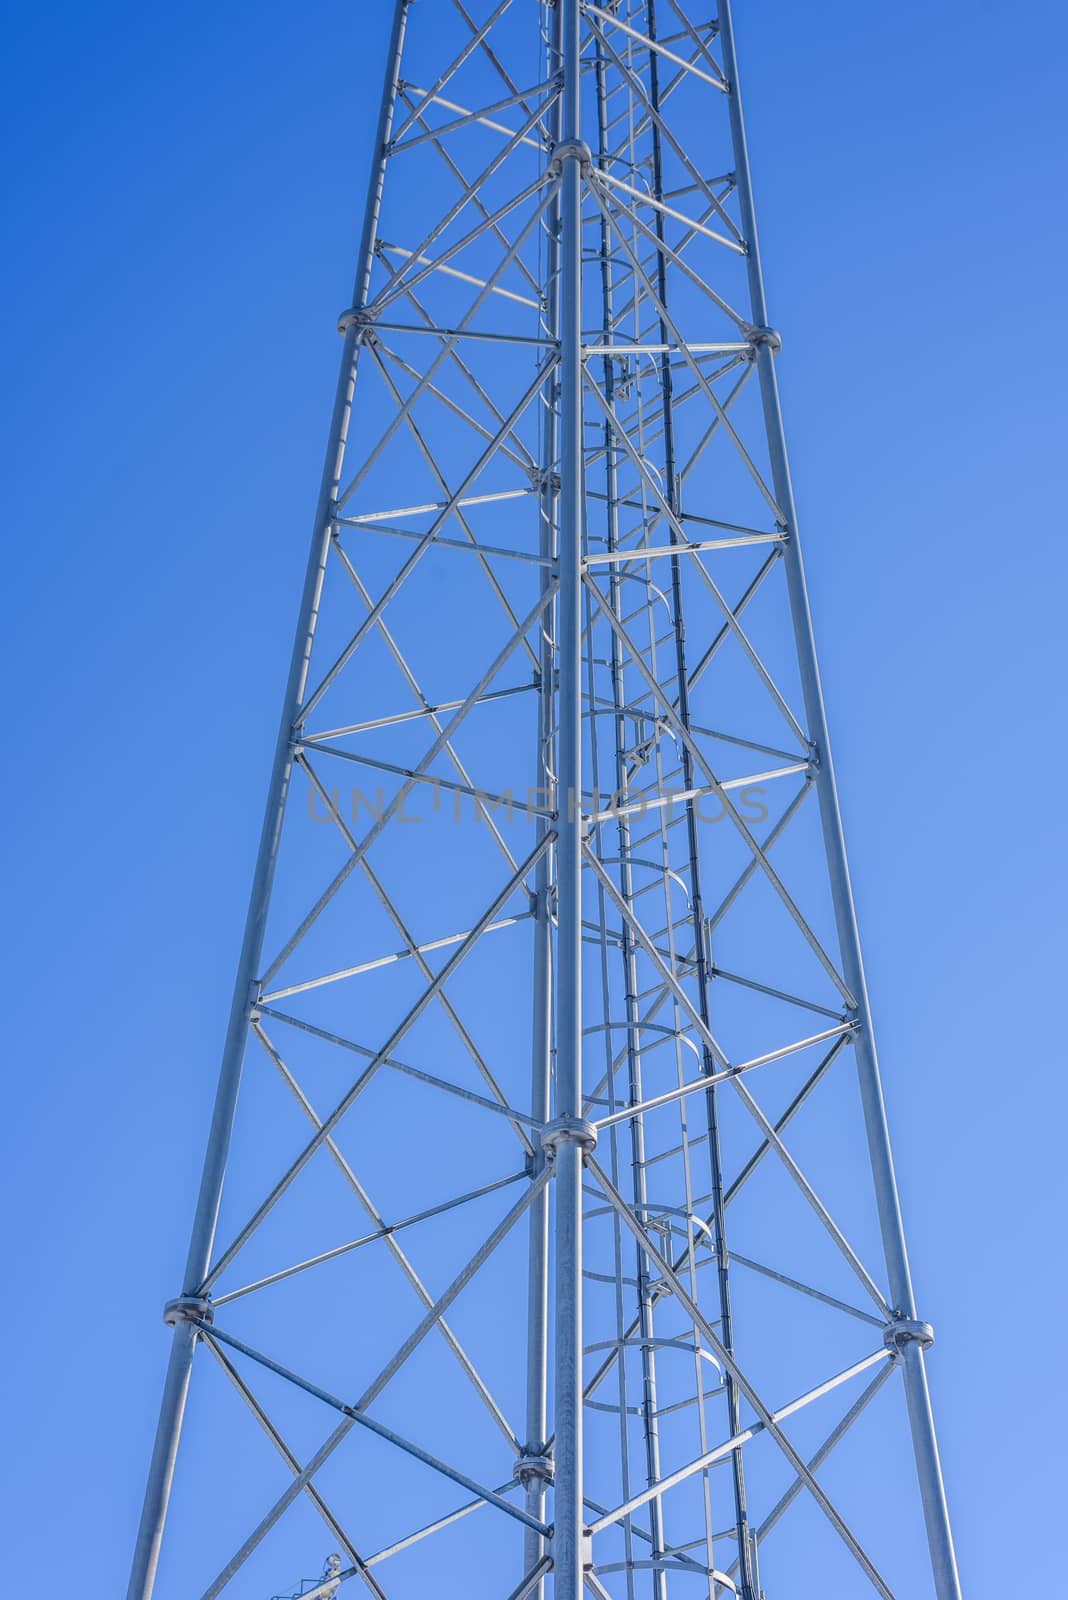 Steel tower with ladder inside against a blue sky.